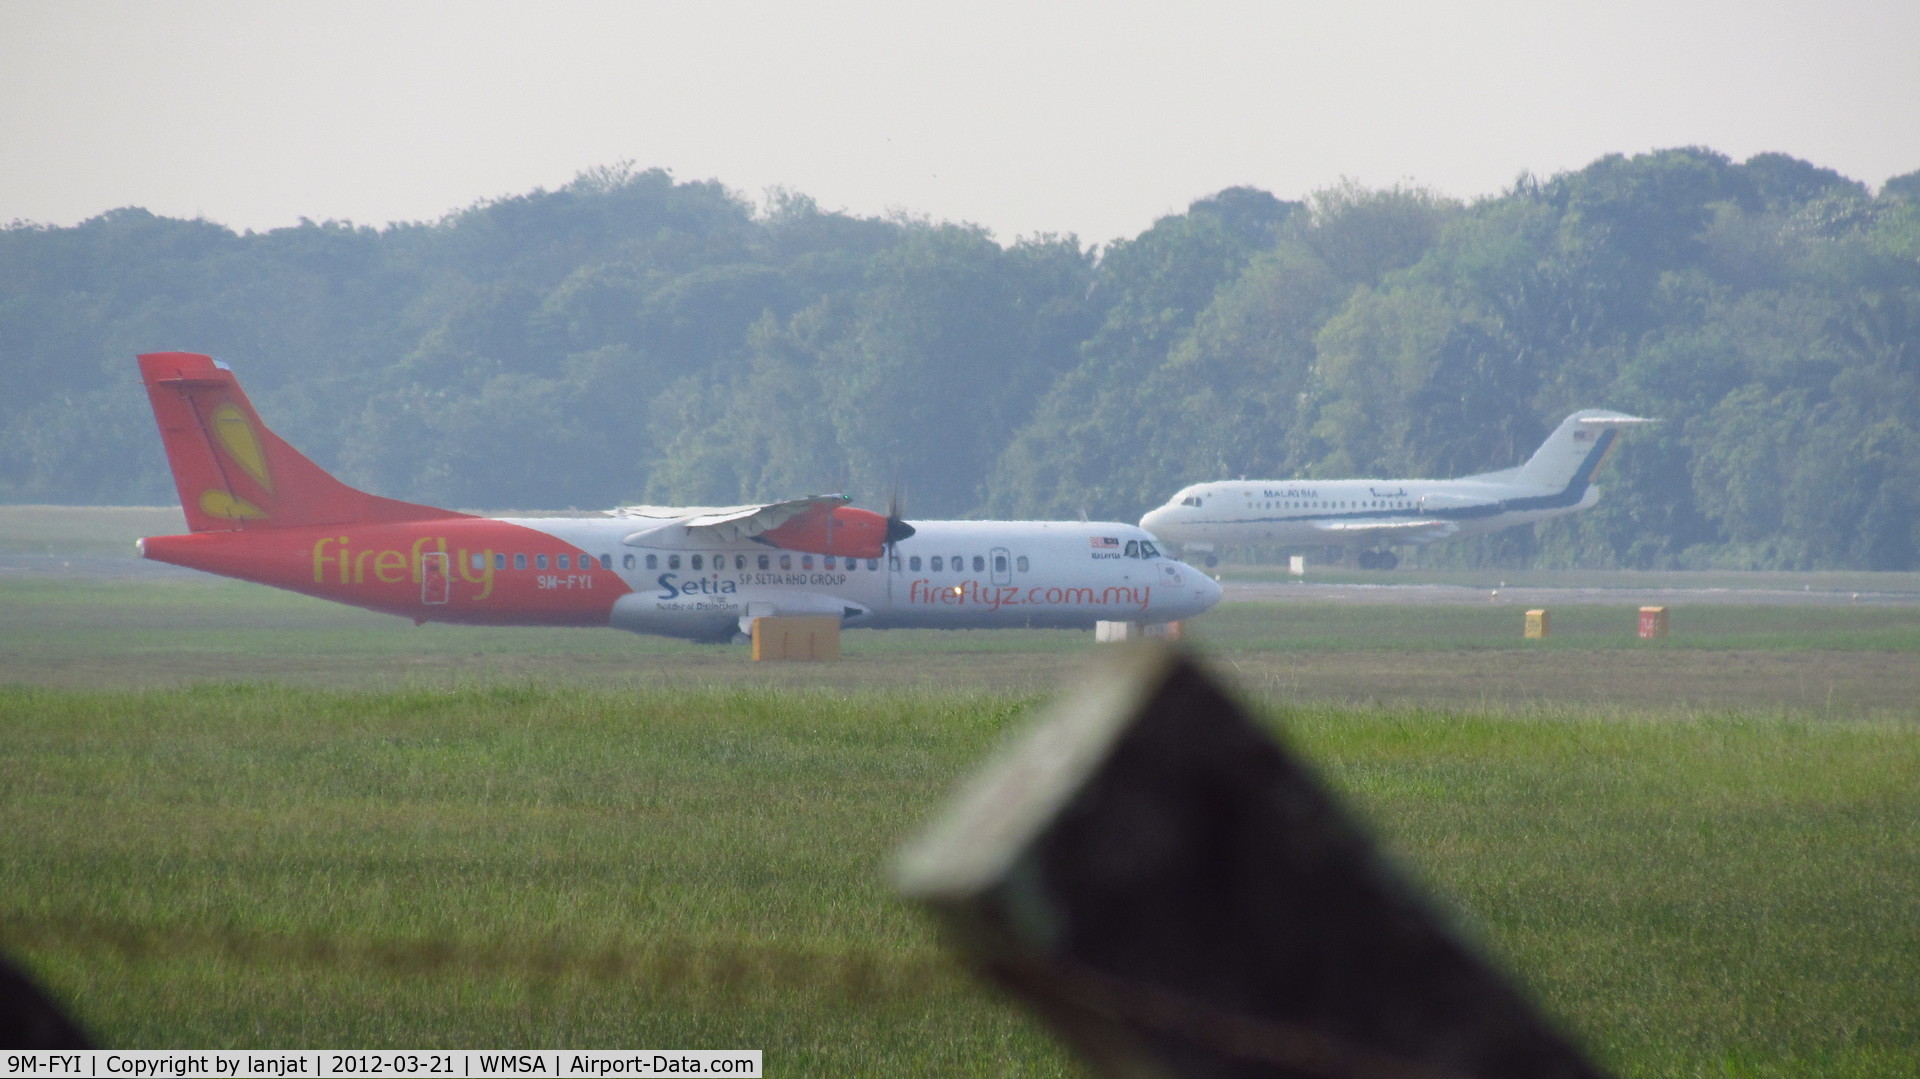 9M-FYI, 2010 ATR 72-212A C/N 935, Waiting at the gate for Departure. Background as seen a Fokker F28 TUDM